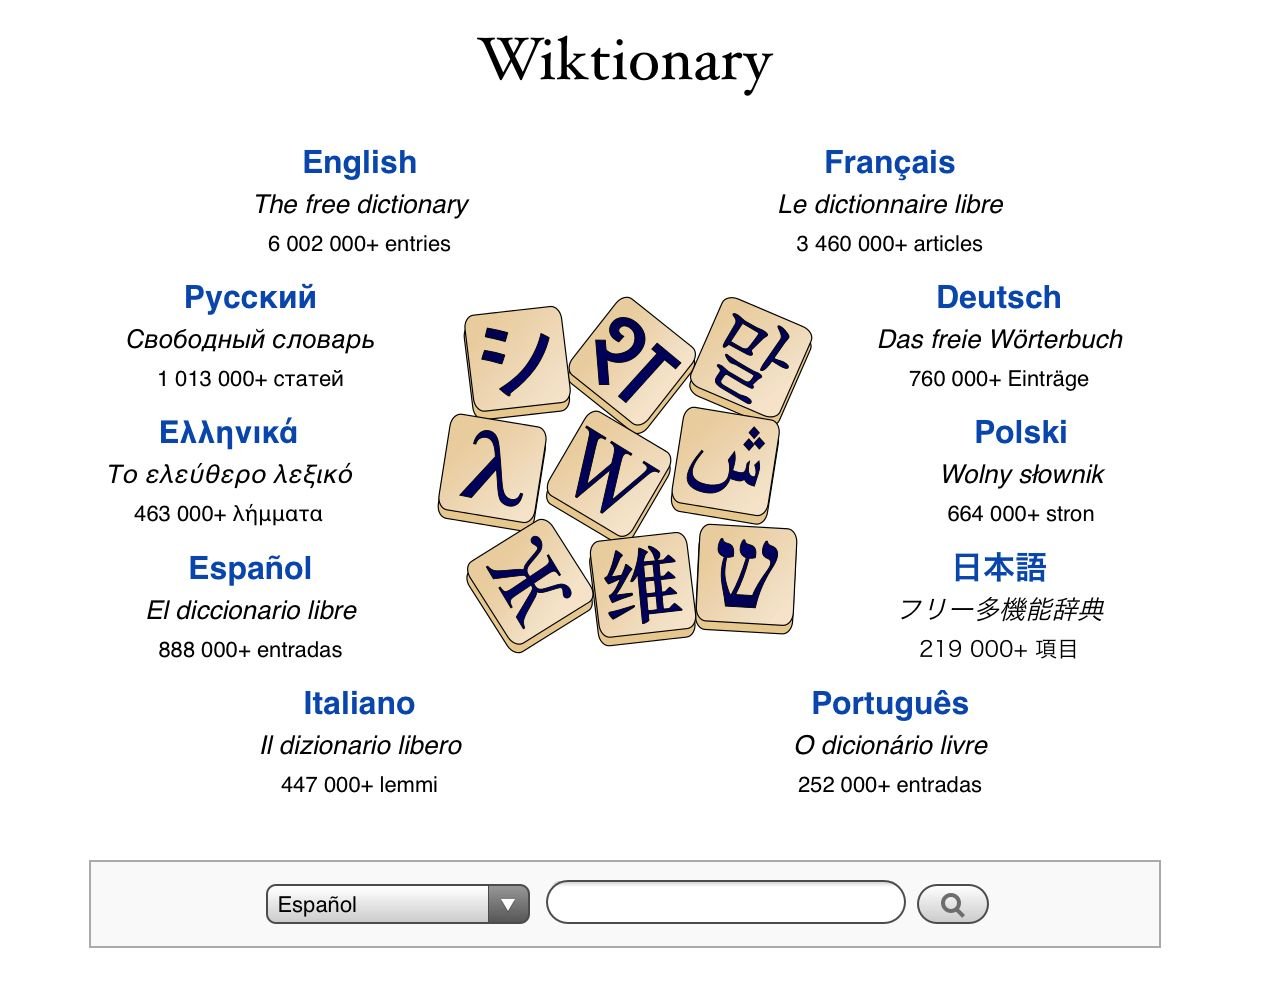 perfect - Wiktionary, the free dictionary